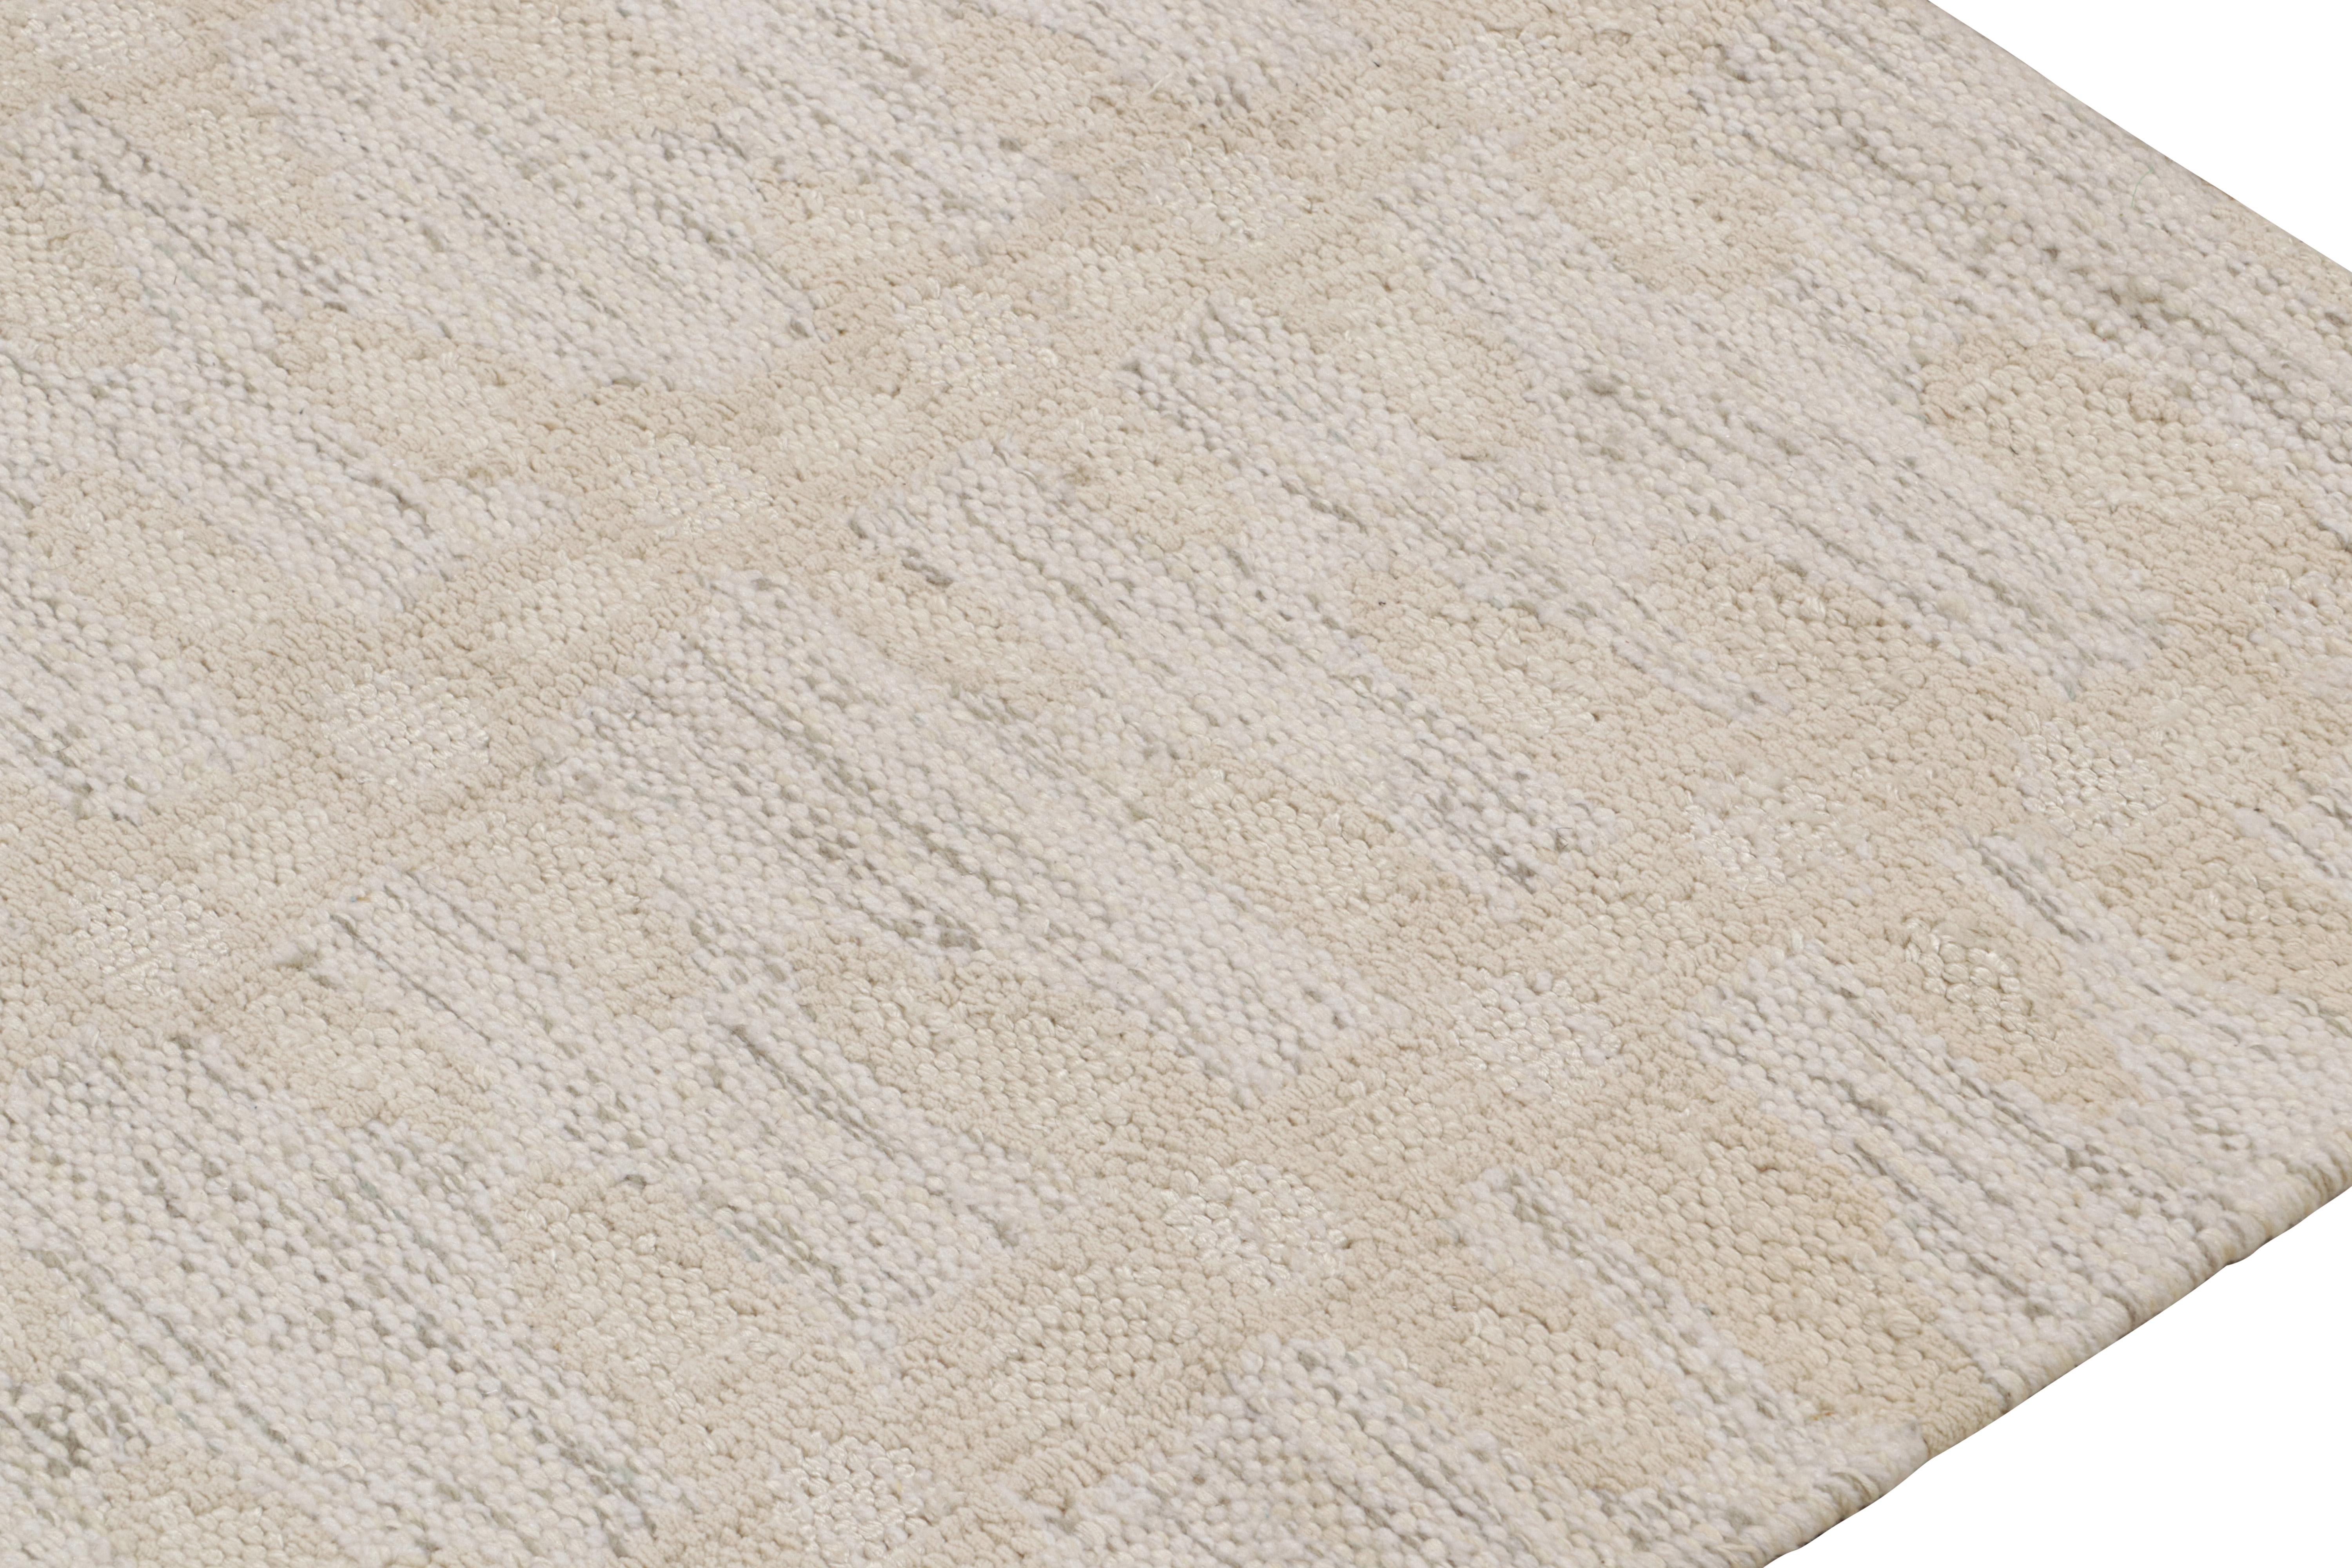 Hand-Woven Rug & Kilim’s Scandinavian Style Kilim runner in White-Beige Floral Patterns For Sale